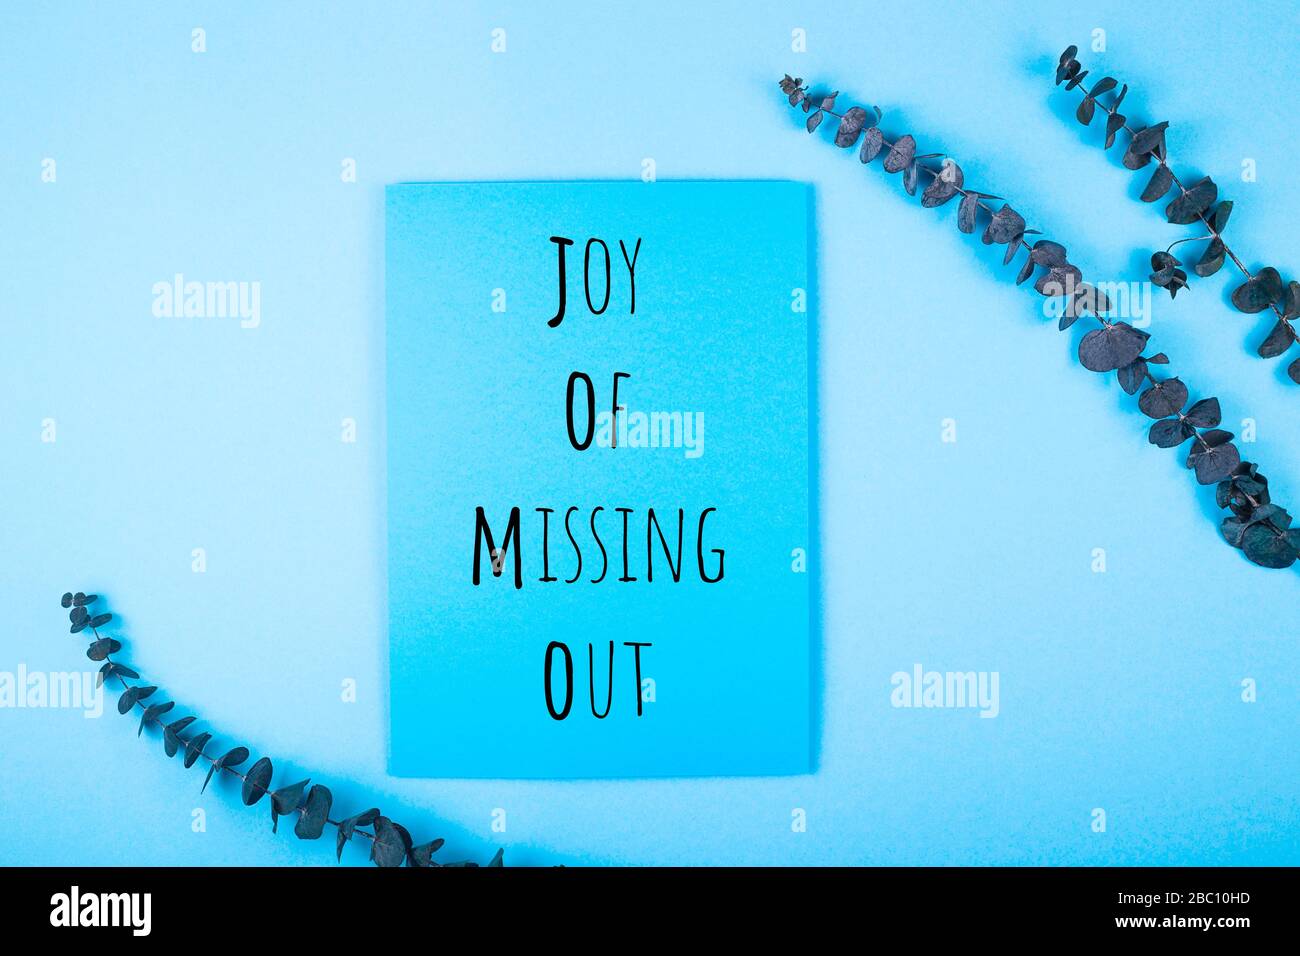 Joy of missing out is written on background with eucalyptus on a blue background. Stock Photo